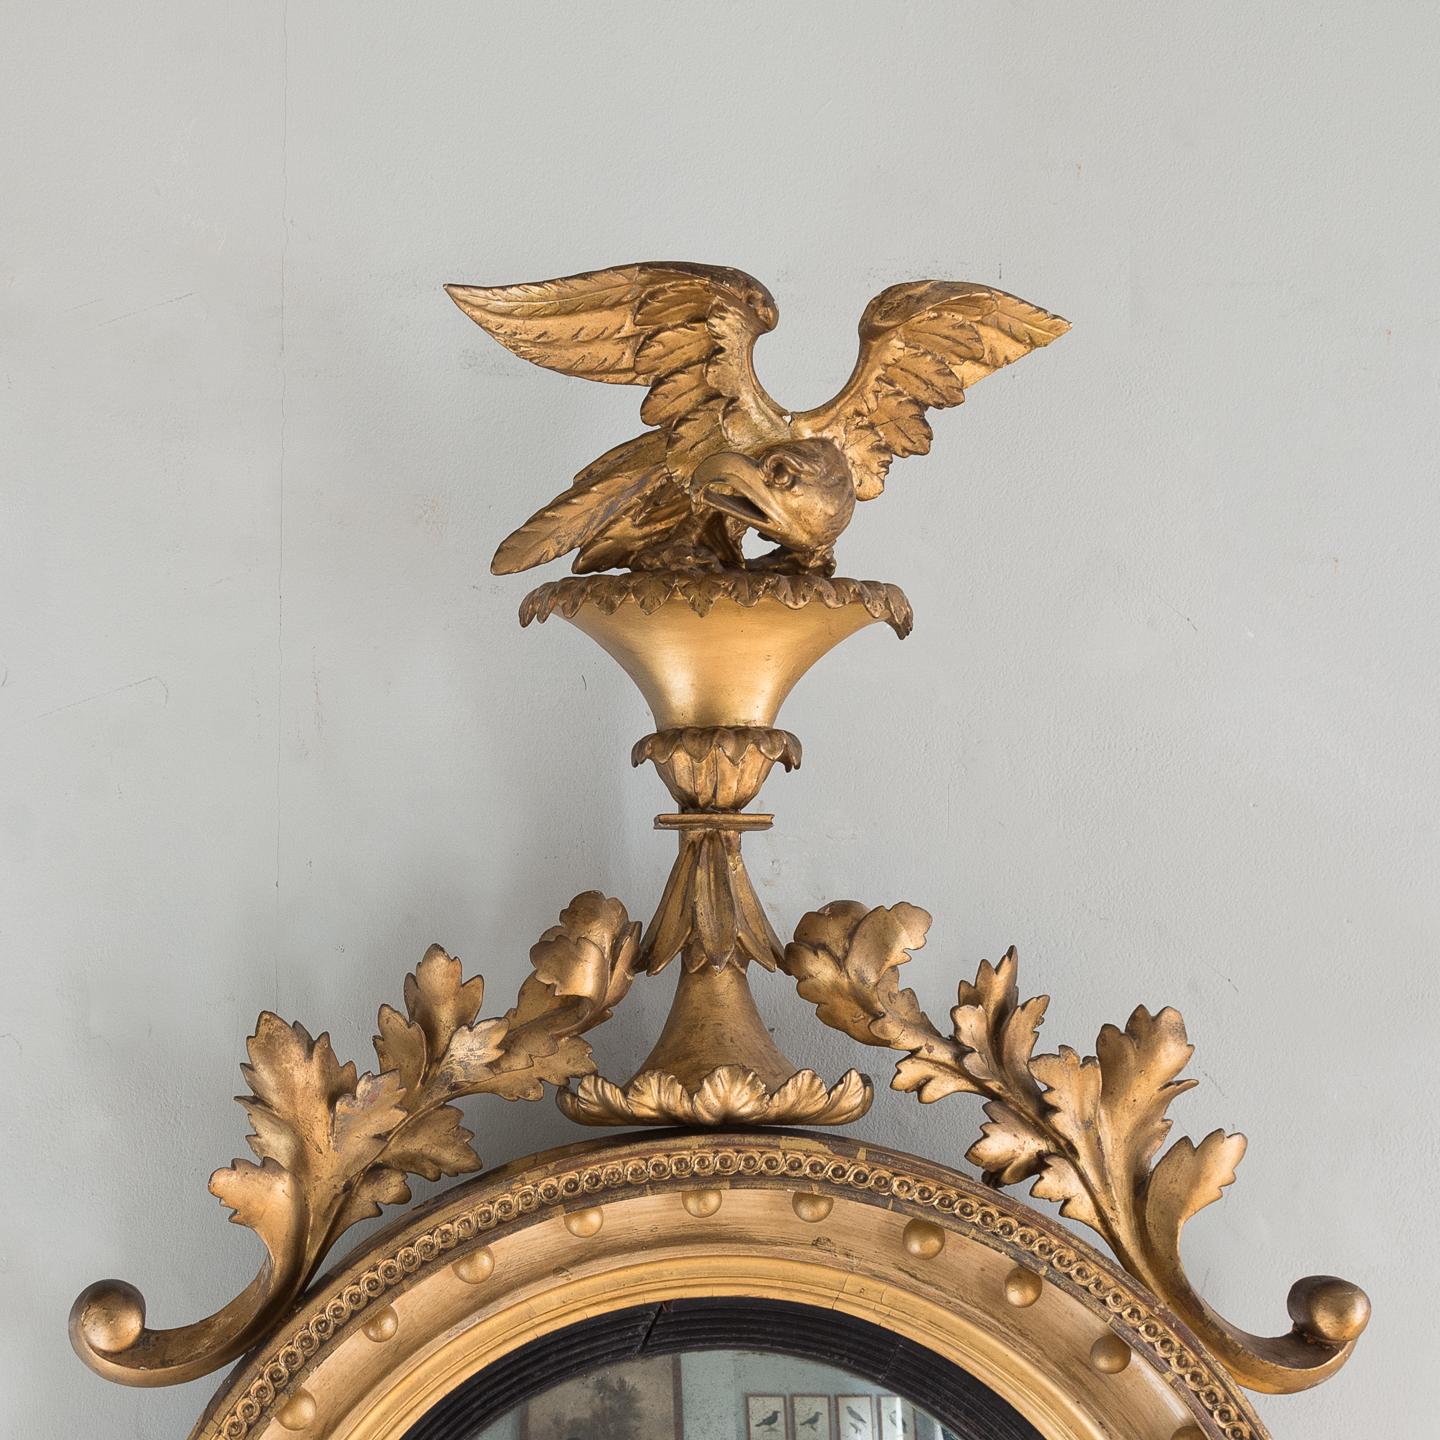 Regency giltwood convex mirror, English, circa 1825, having a well carved eagle on a rocky outcrop above interlocking leaf and scrolls leading to detailed circular frame including giltwood ball decoration, reeded ebonized slip and foxed mirror